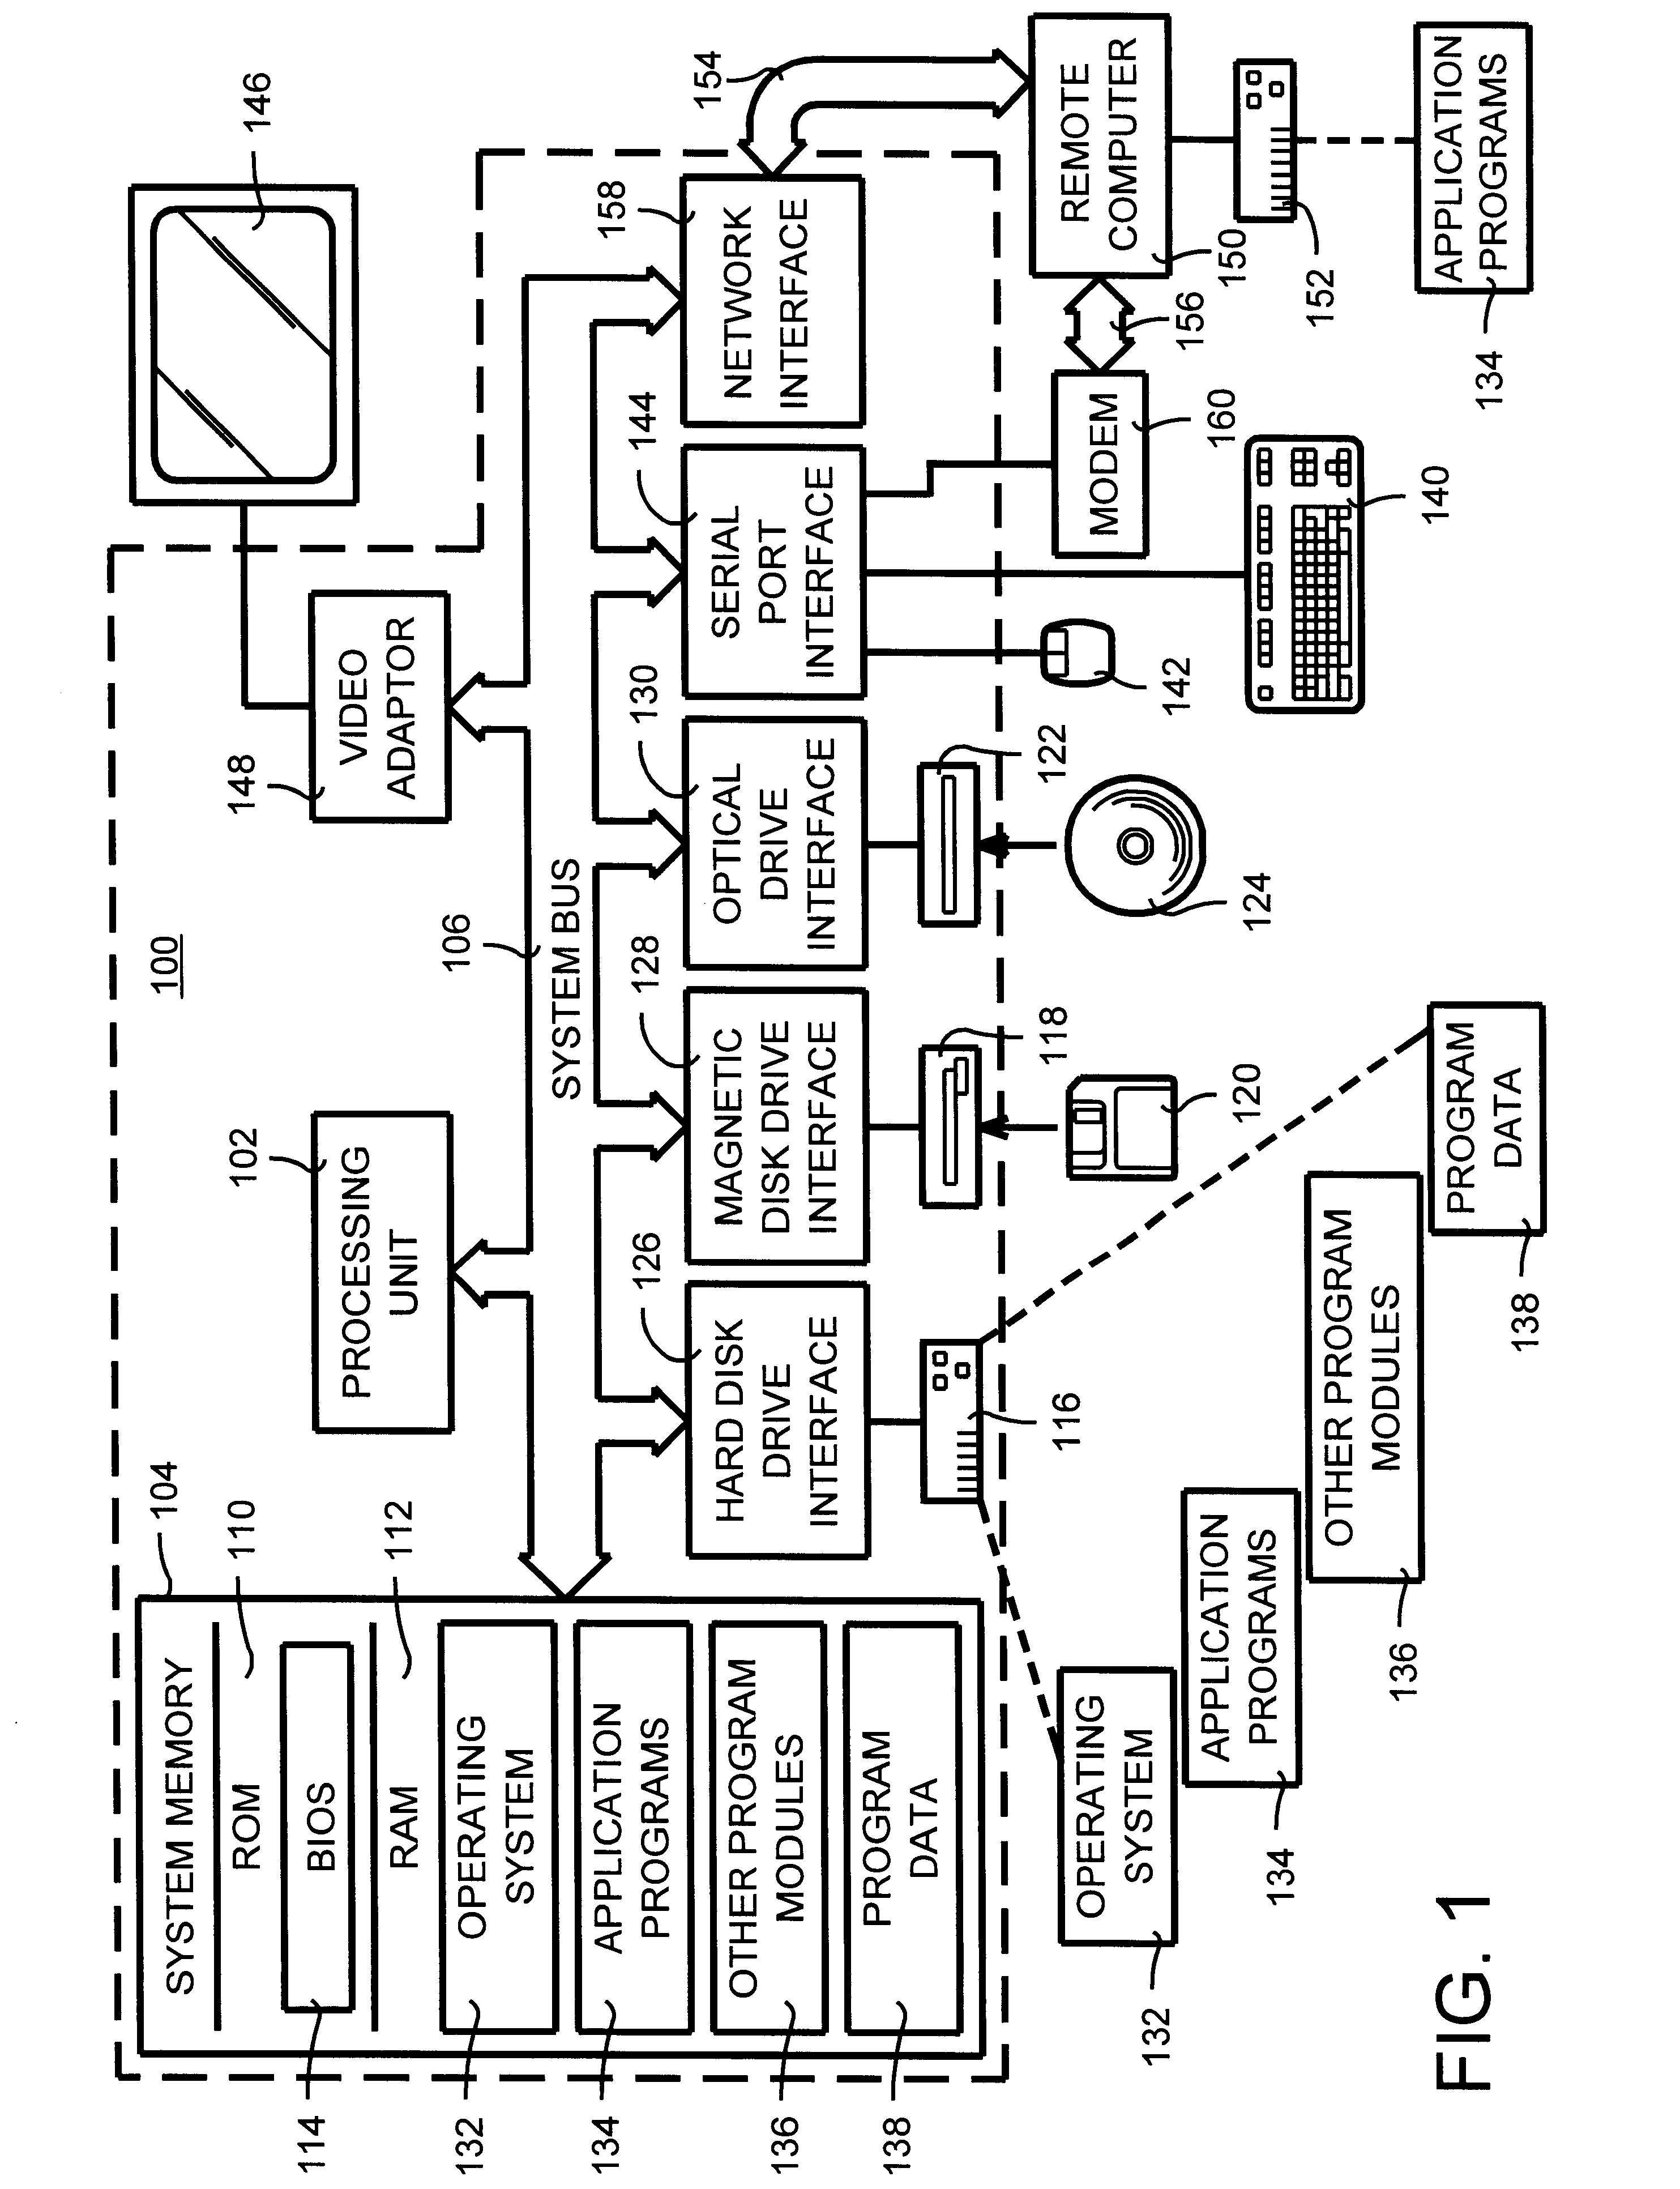 System and method for rectifying images of three dimensional objects